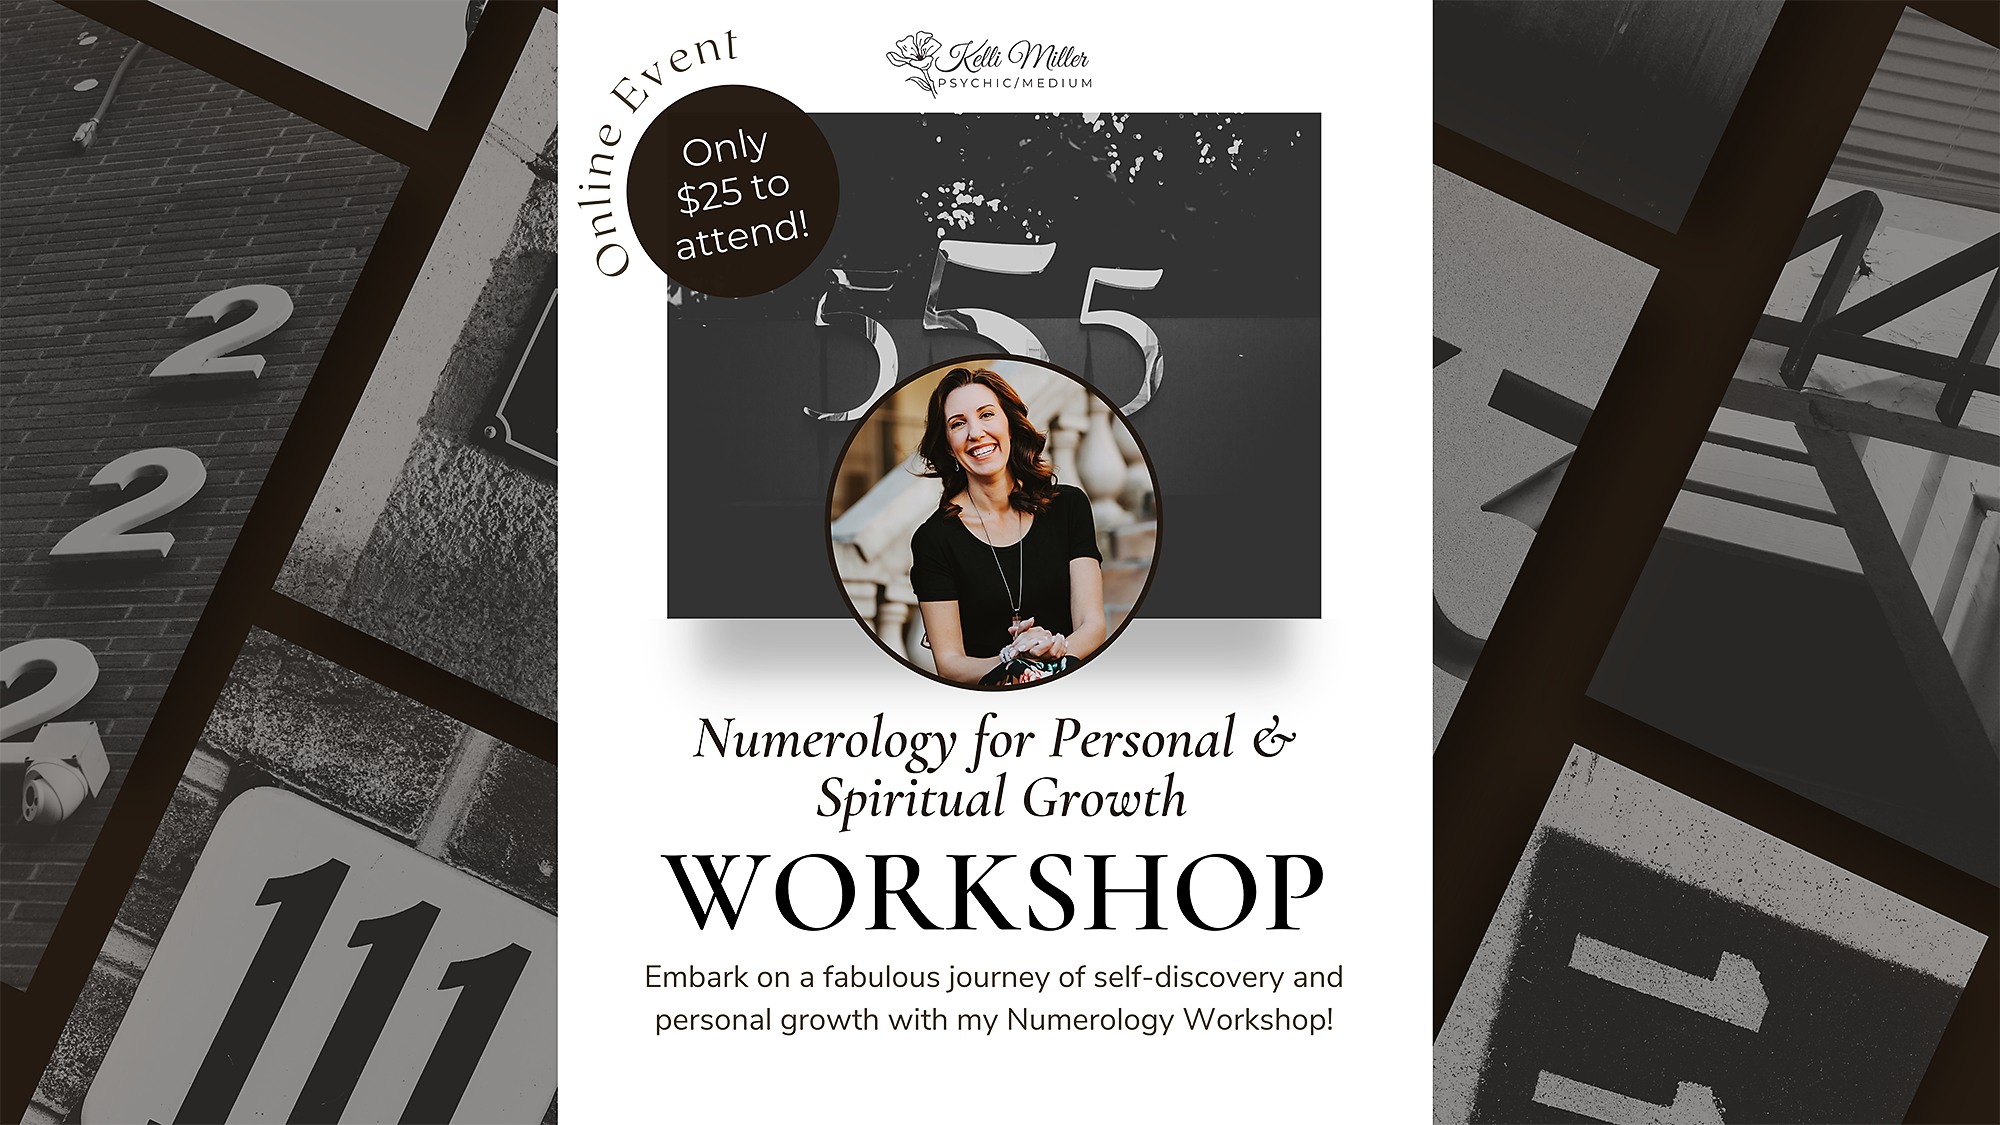 Numerology for Personal & Spiritual Growth Workshop